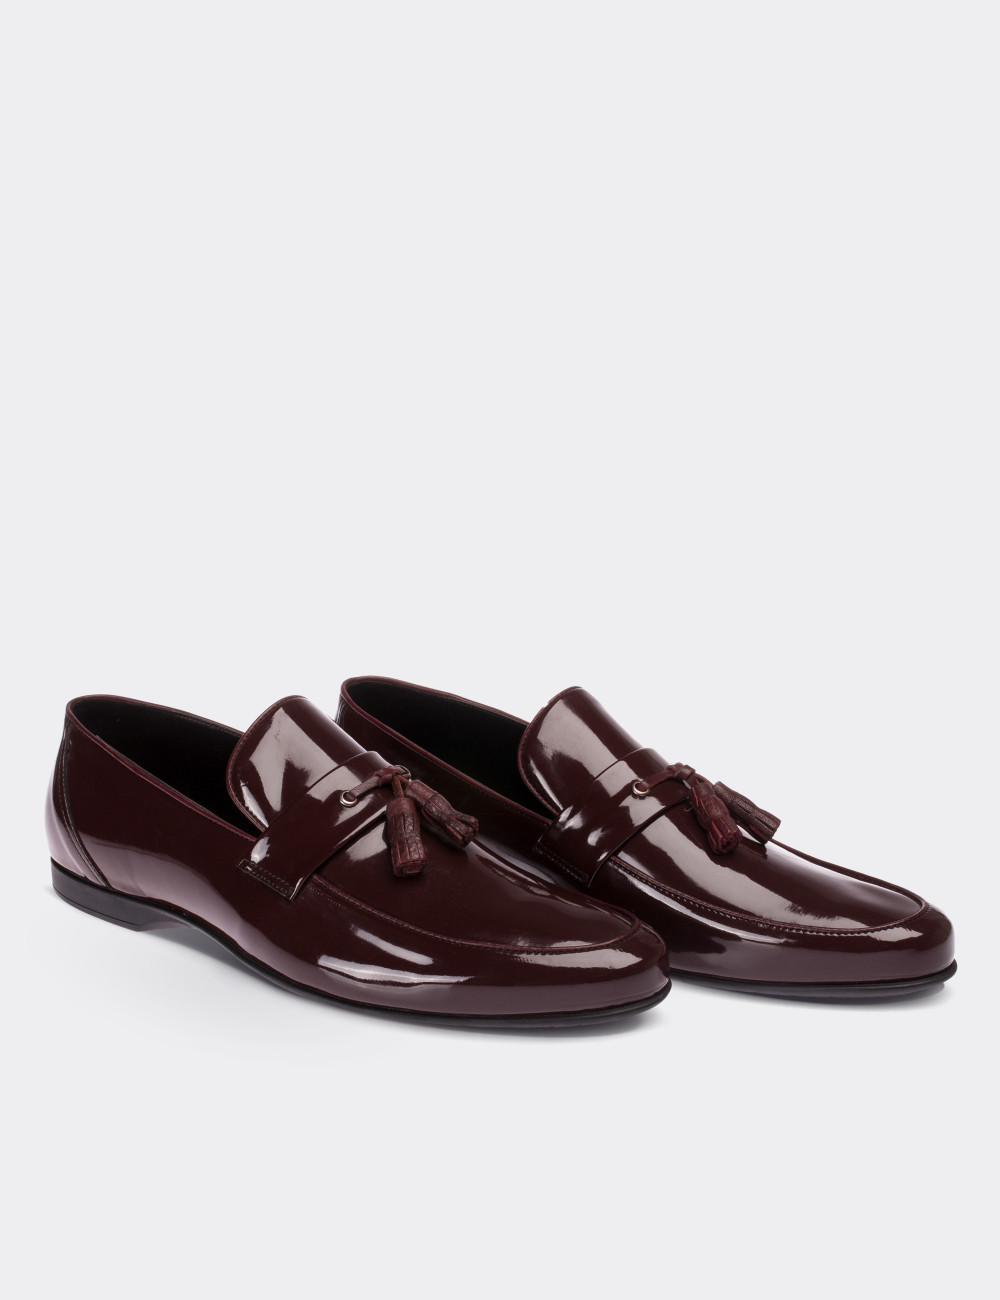 Burgundy Patent Leather Loafers - 01537MBRDC01